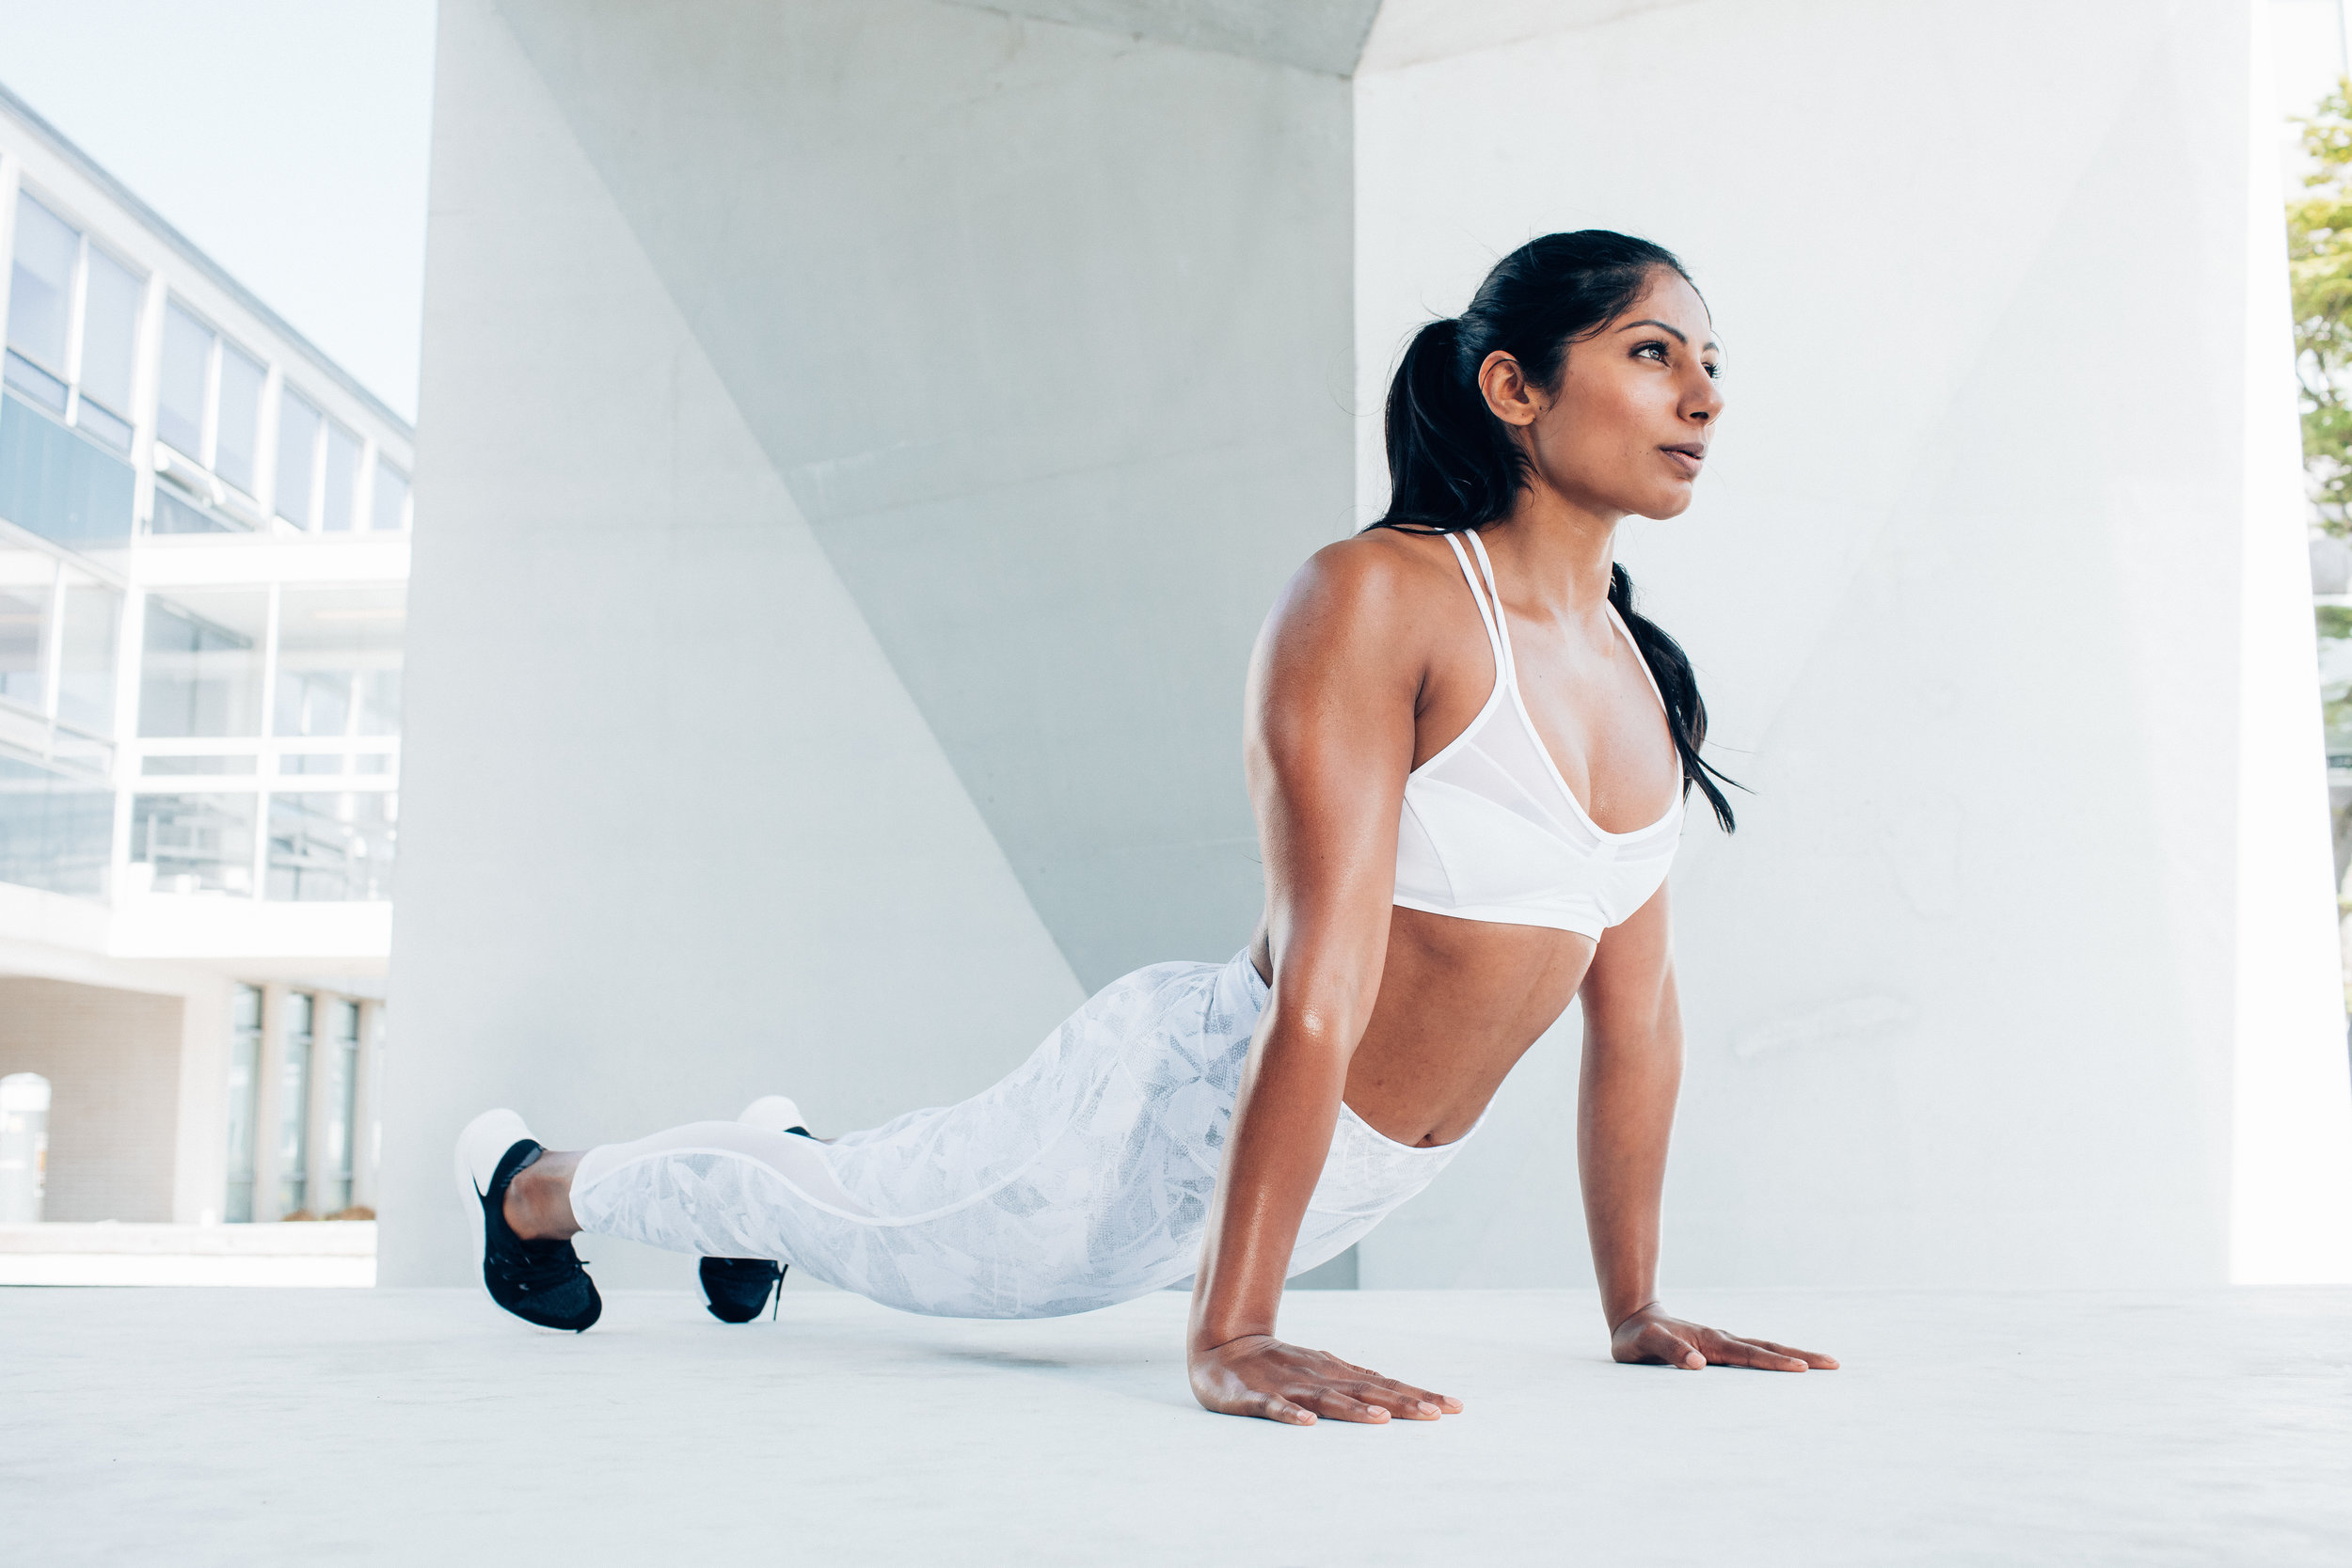 Model Pallavi Gurrala stretching on a fitness photoshoot with photographer Anick Violette.